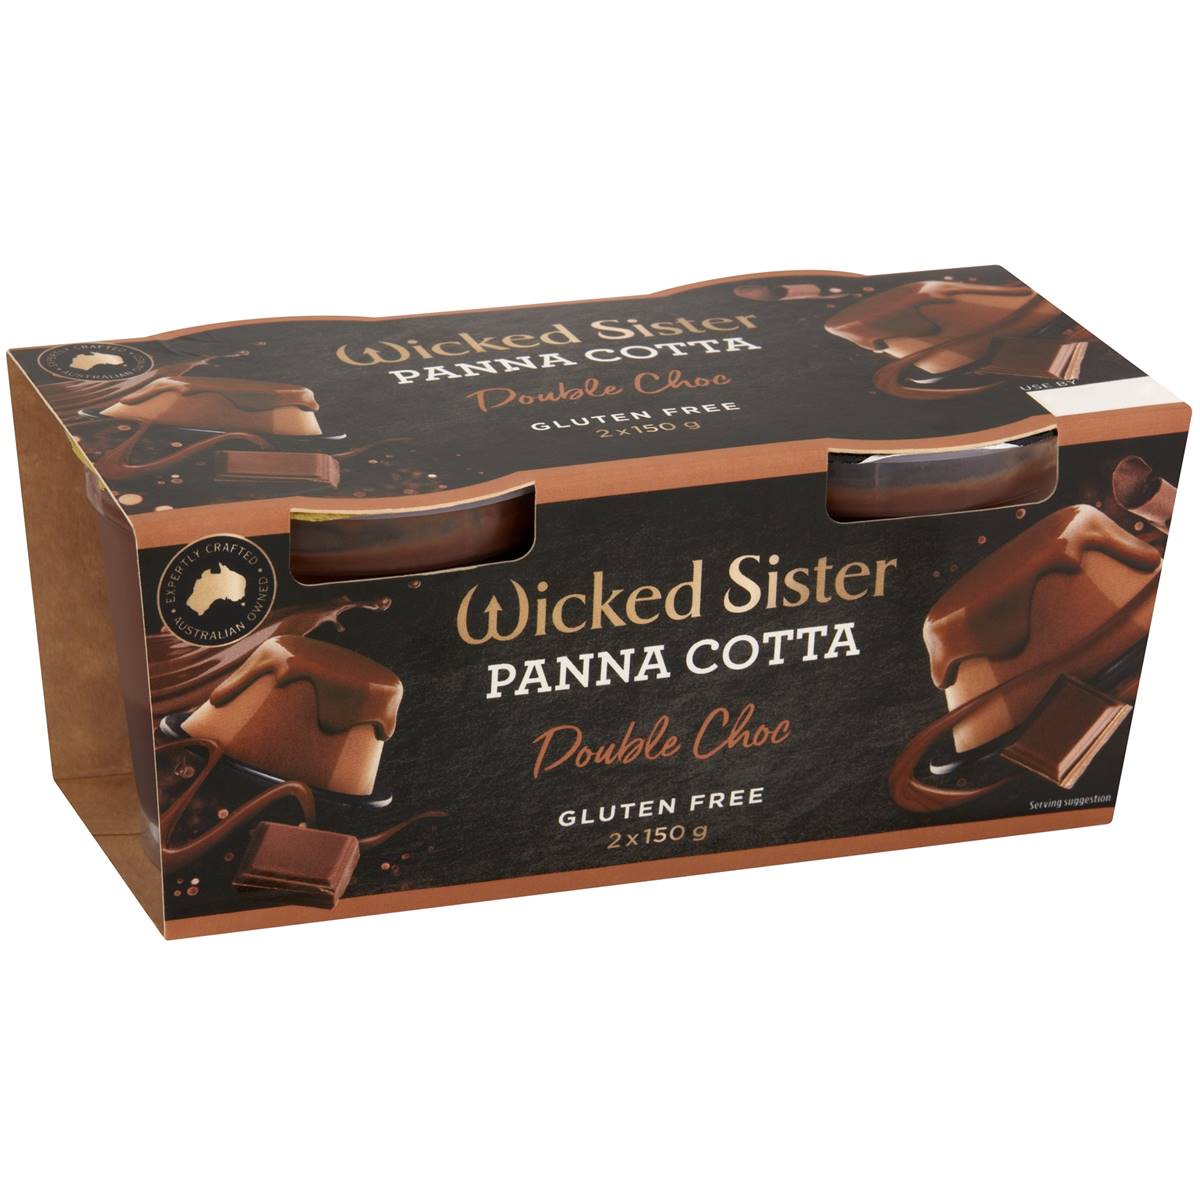 Calories in Wicked Sister Panna Cotta Double Choc Gluten Free